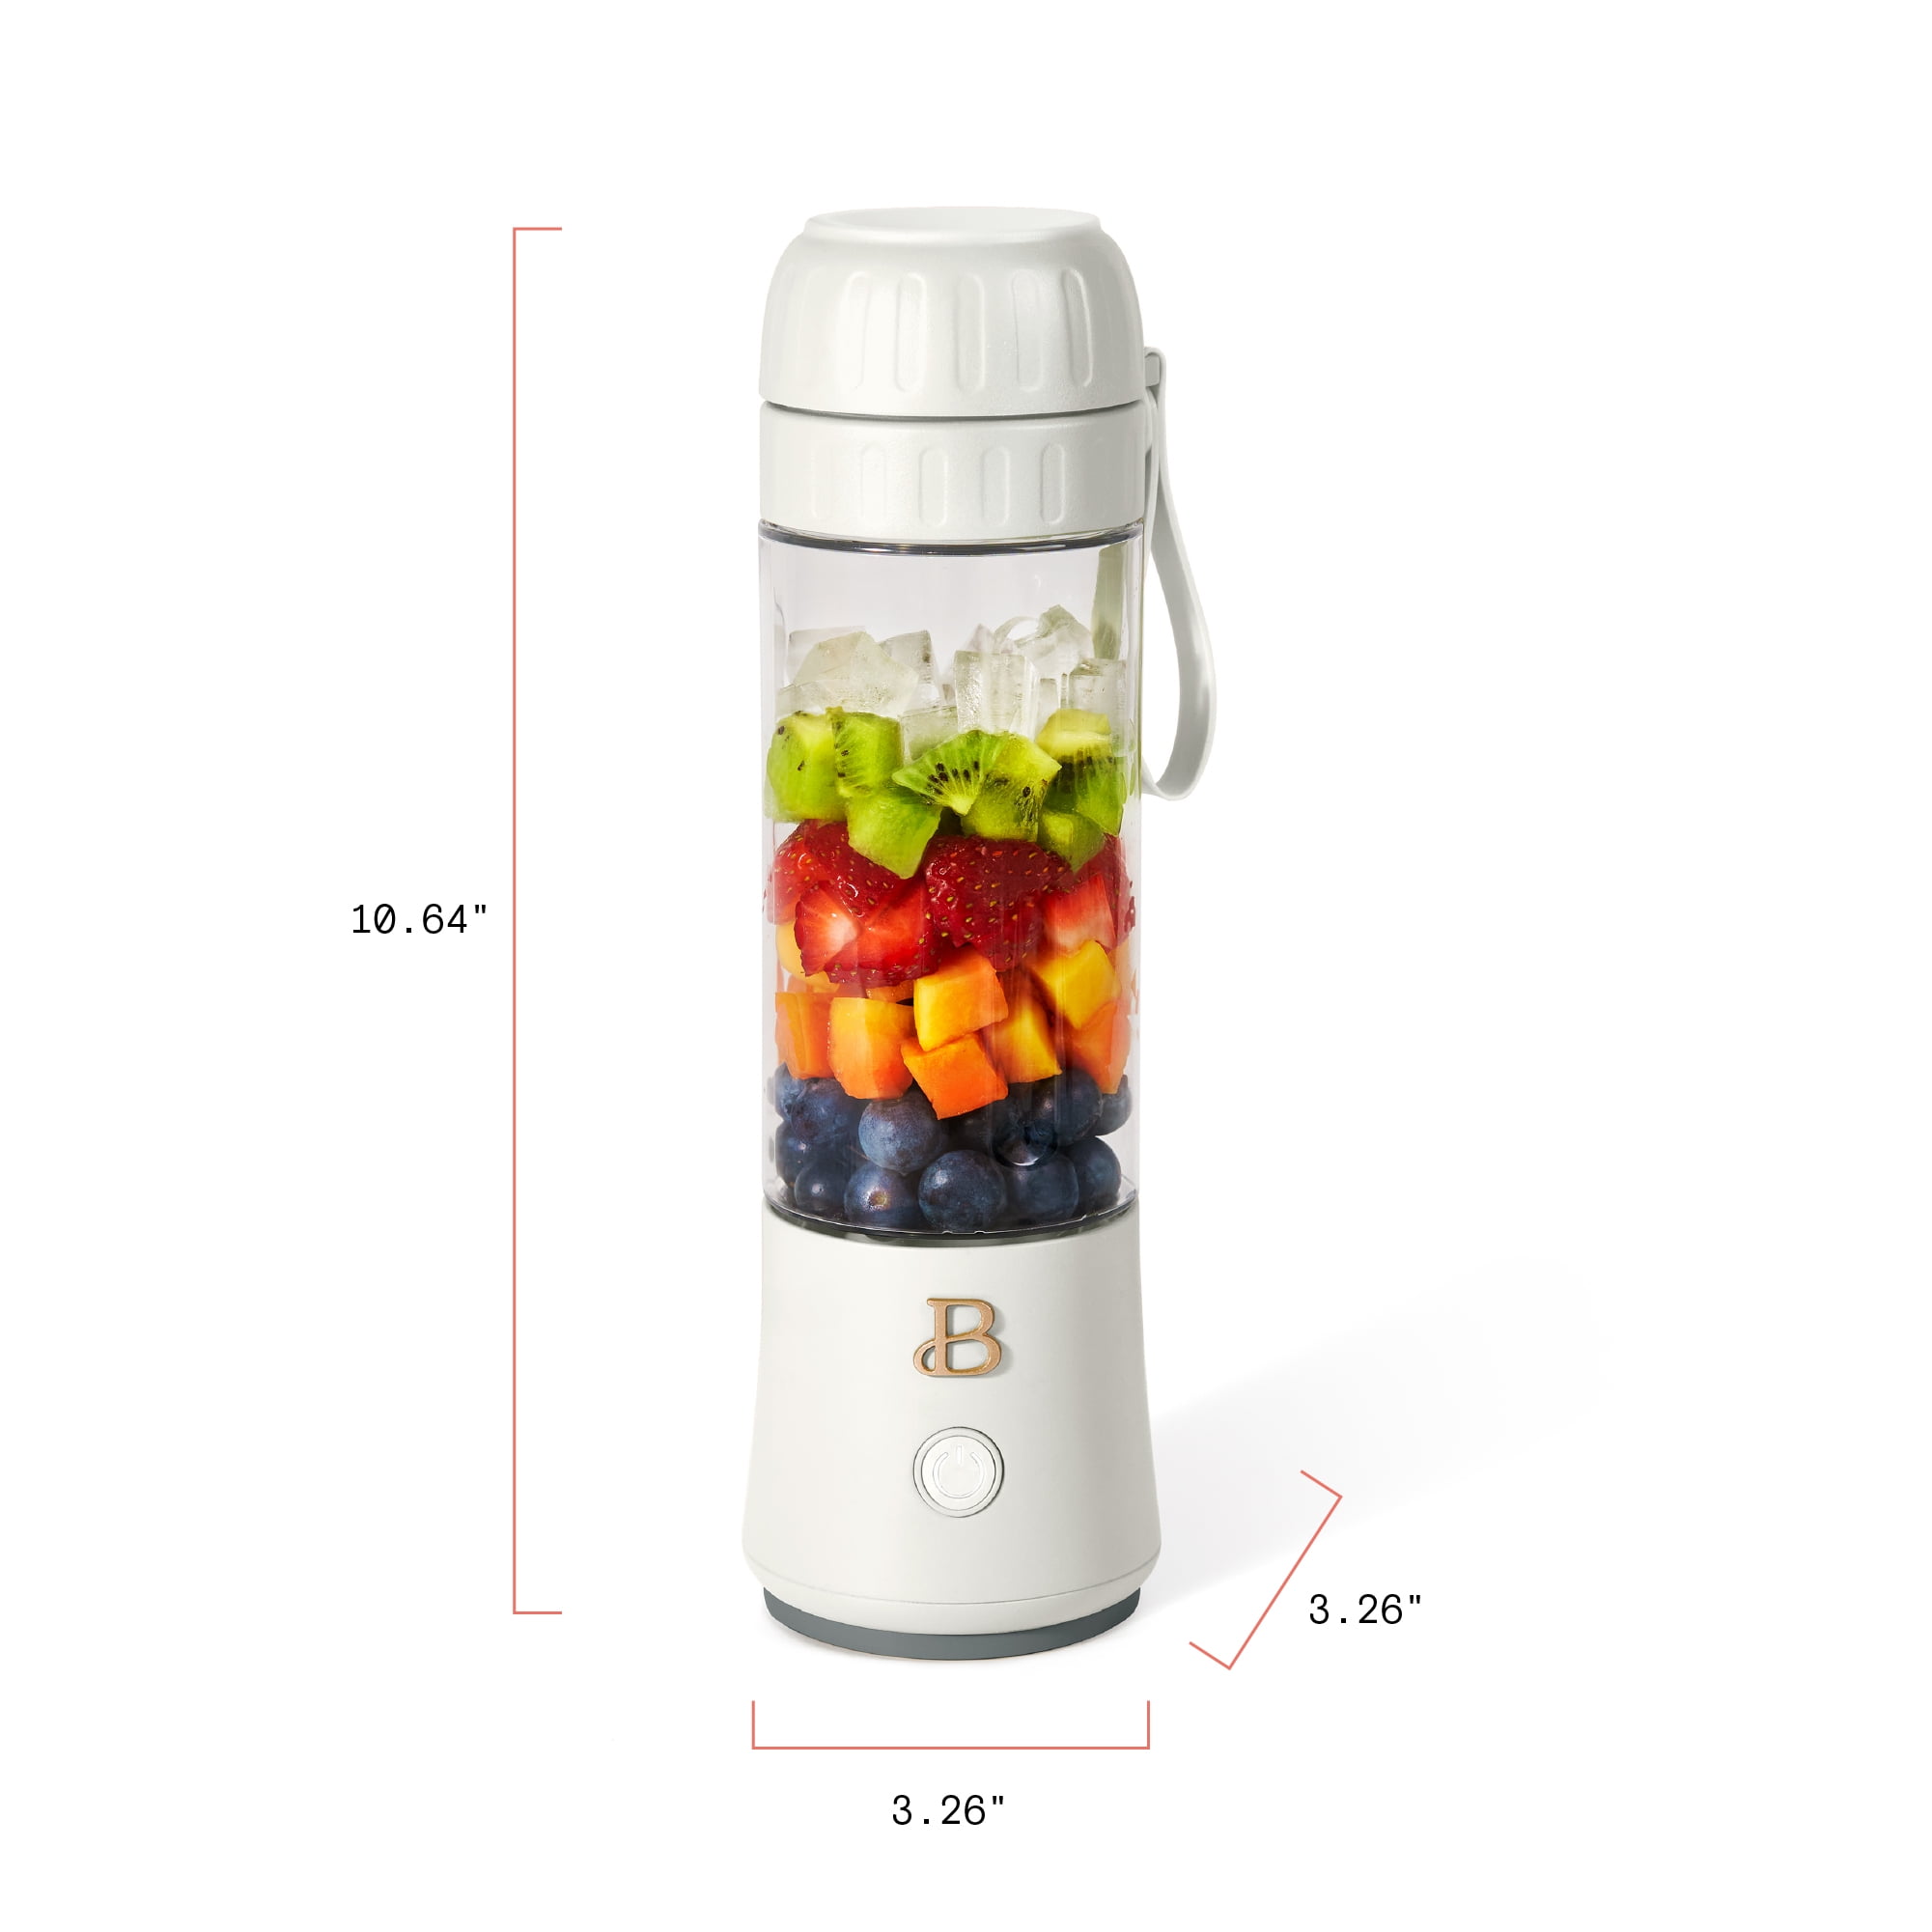  OTE Personal Blender for Shakes and Smoothie with 14 OZ High  Boron Glass Container To Go ​400ml Small Portable Electric Juicer Mixers  for Fruit best choice for Kitchen MINI Juice Maker